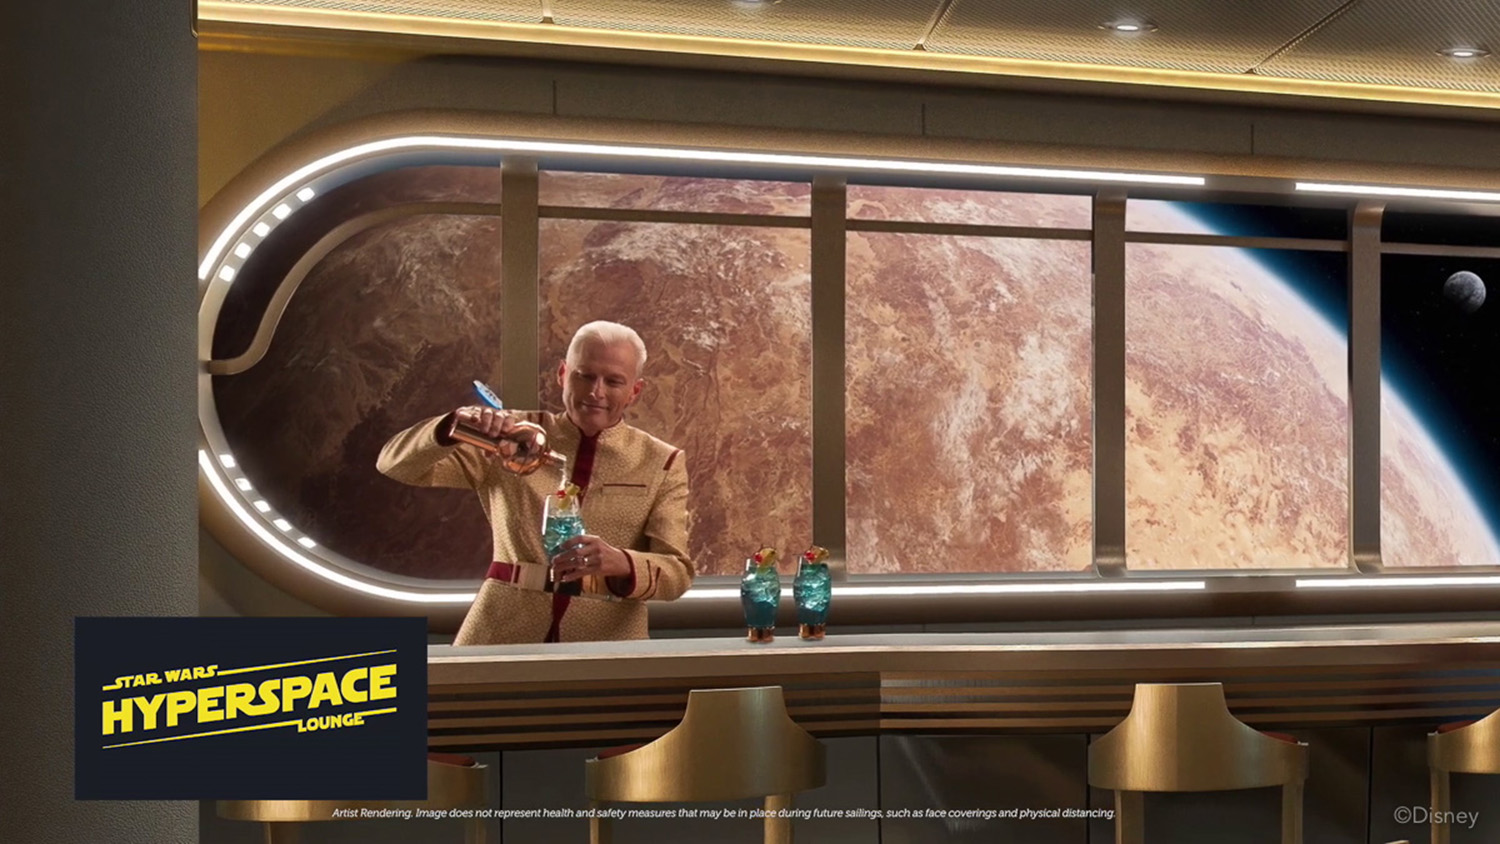 Star Wars Hyperspace Lounge Launches Aboard the Disney Wish in 2022